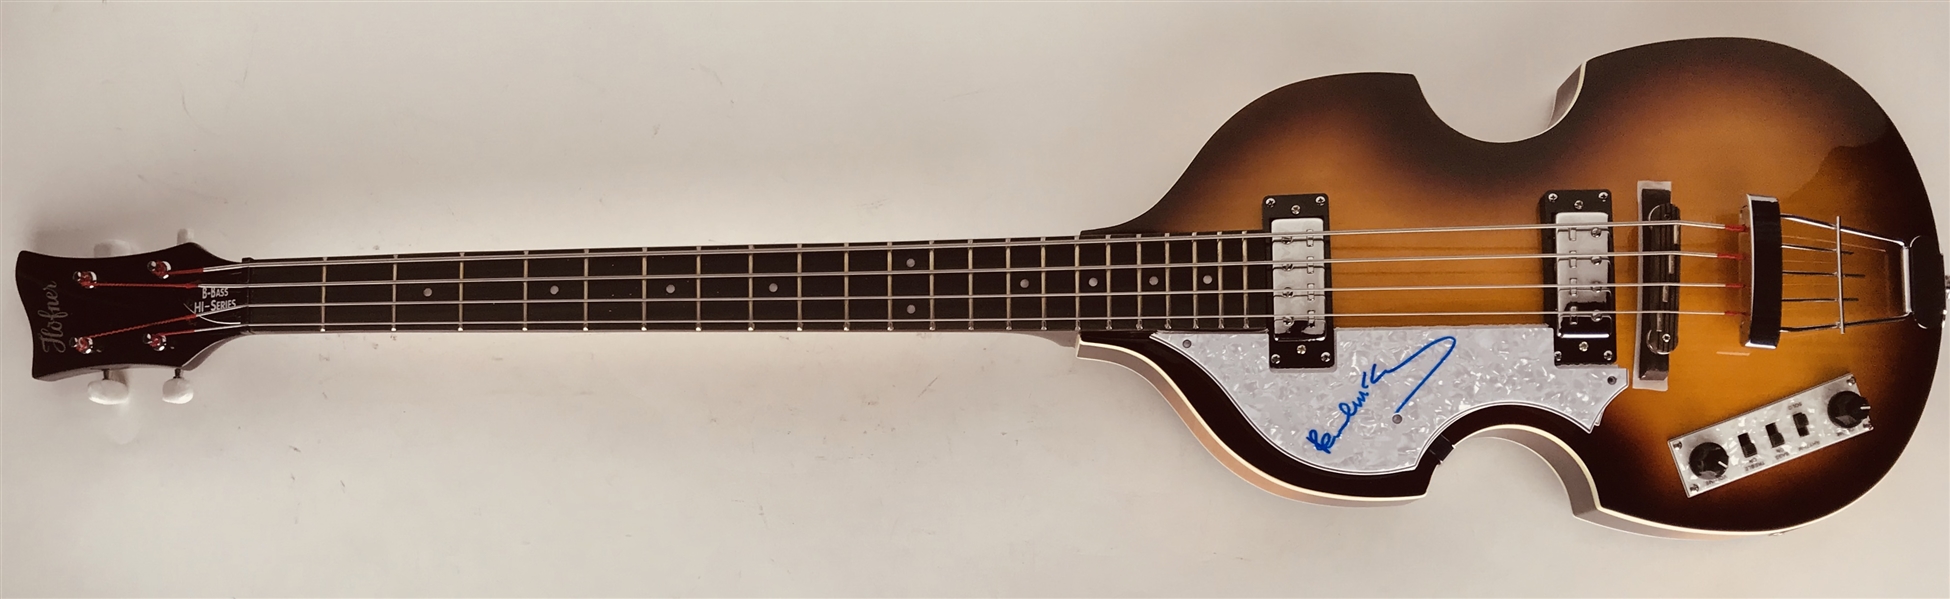  The Beatles: Paul McCartney Superbly Signed Left-Handed Hofner Bass Guitar - The Iconic Beatle Bass! (Caiazzo LOA)